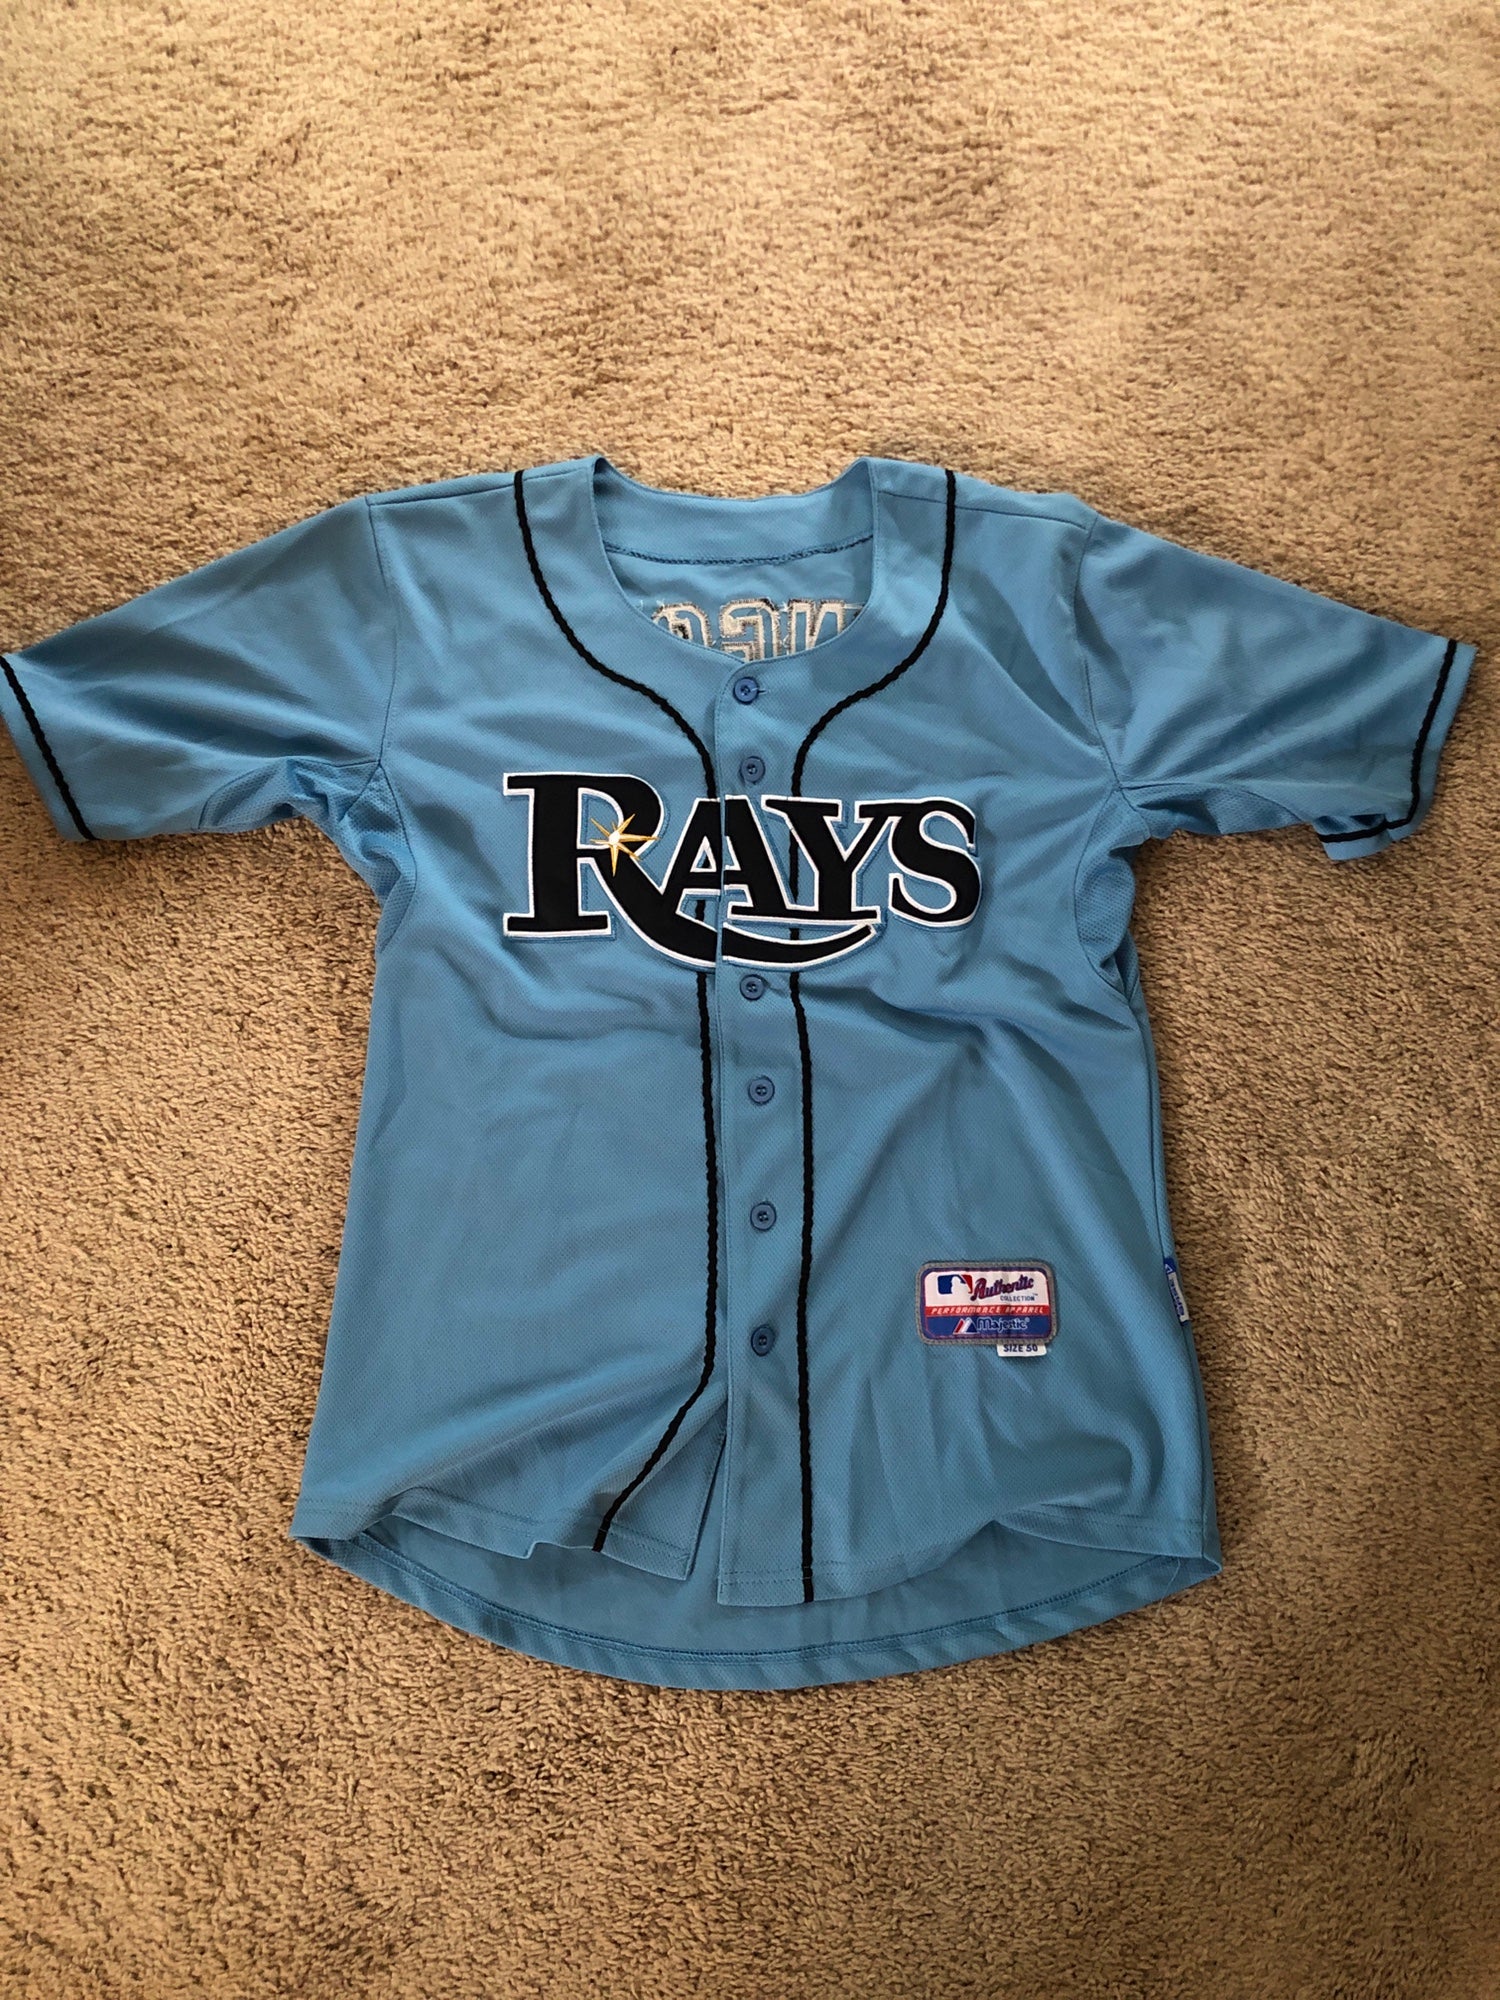 Evan Longoria signed jersey with Mead chasky sports enterprise